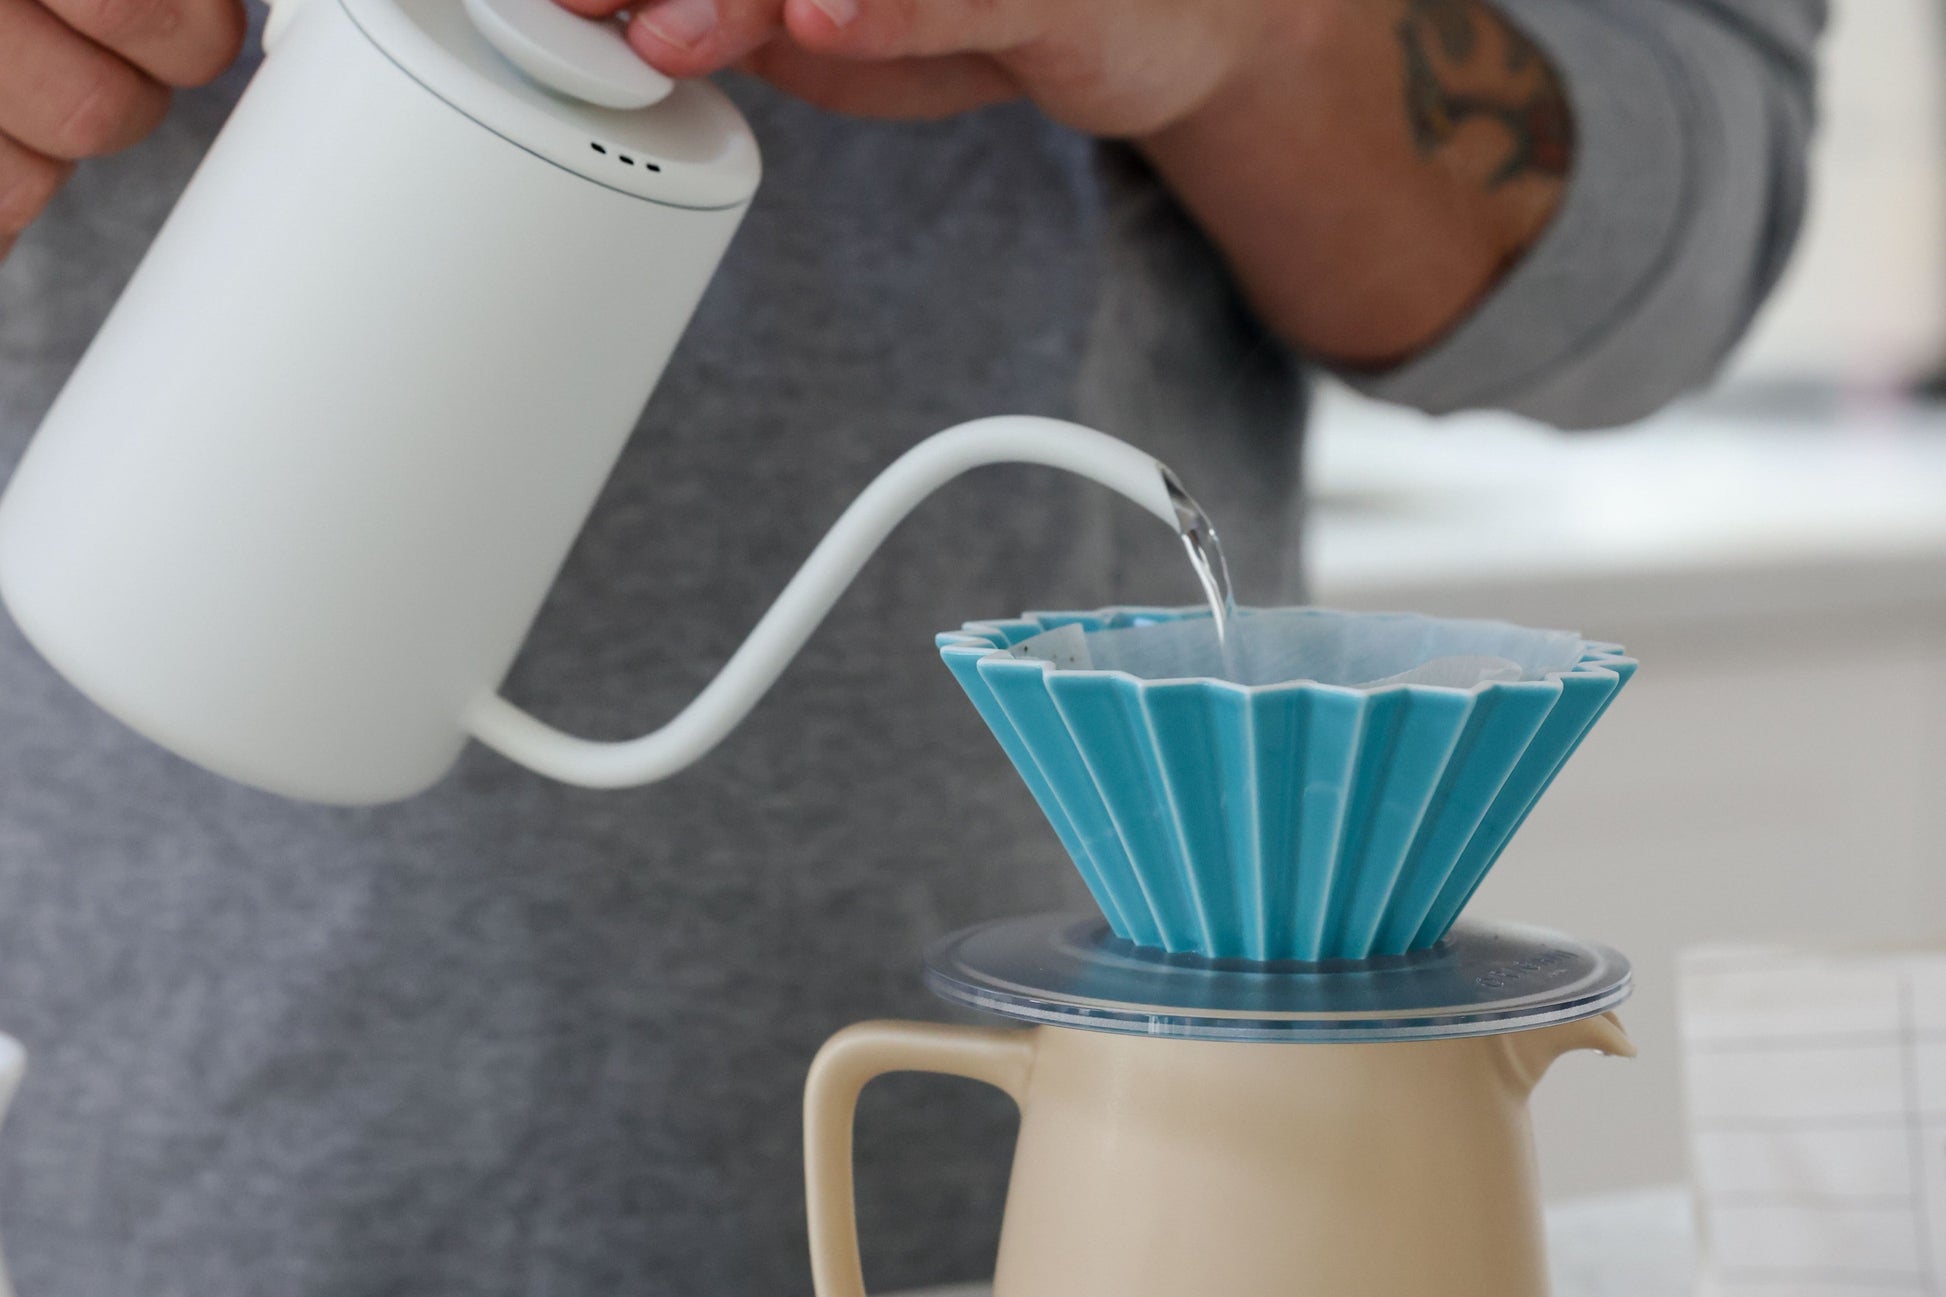 Bright blue ORIGAMI coffee dripper in use at home